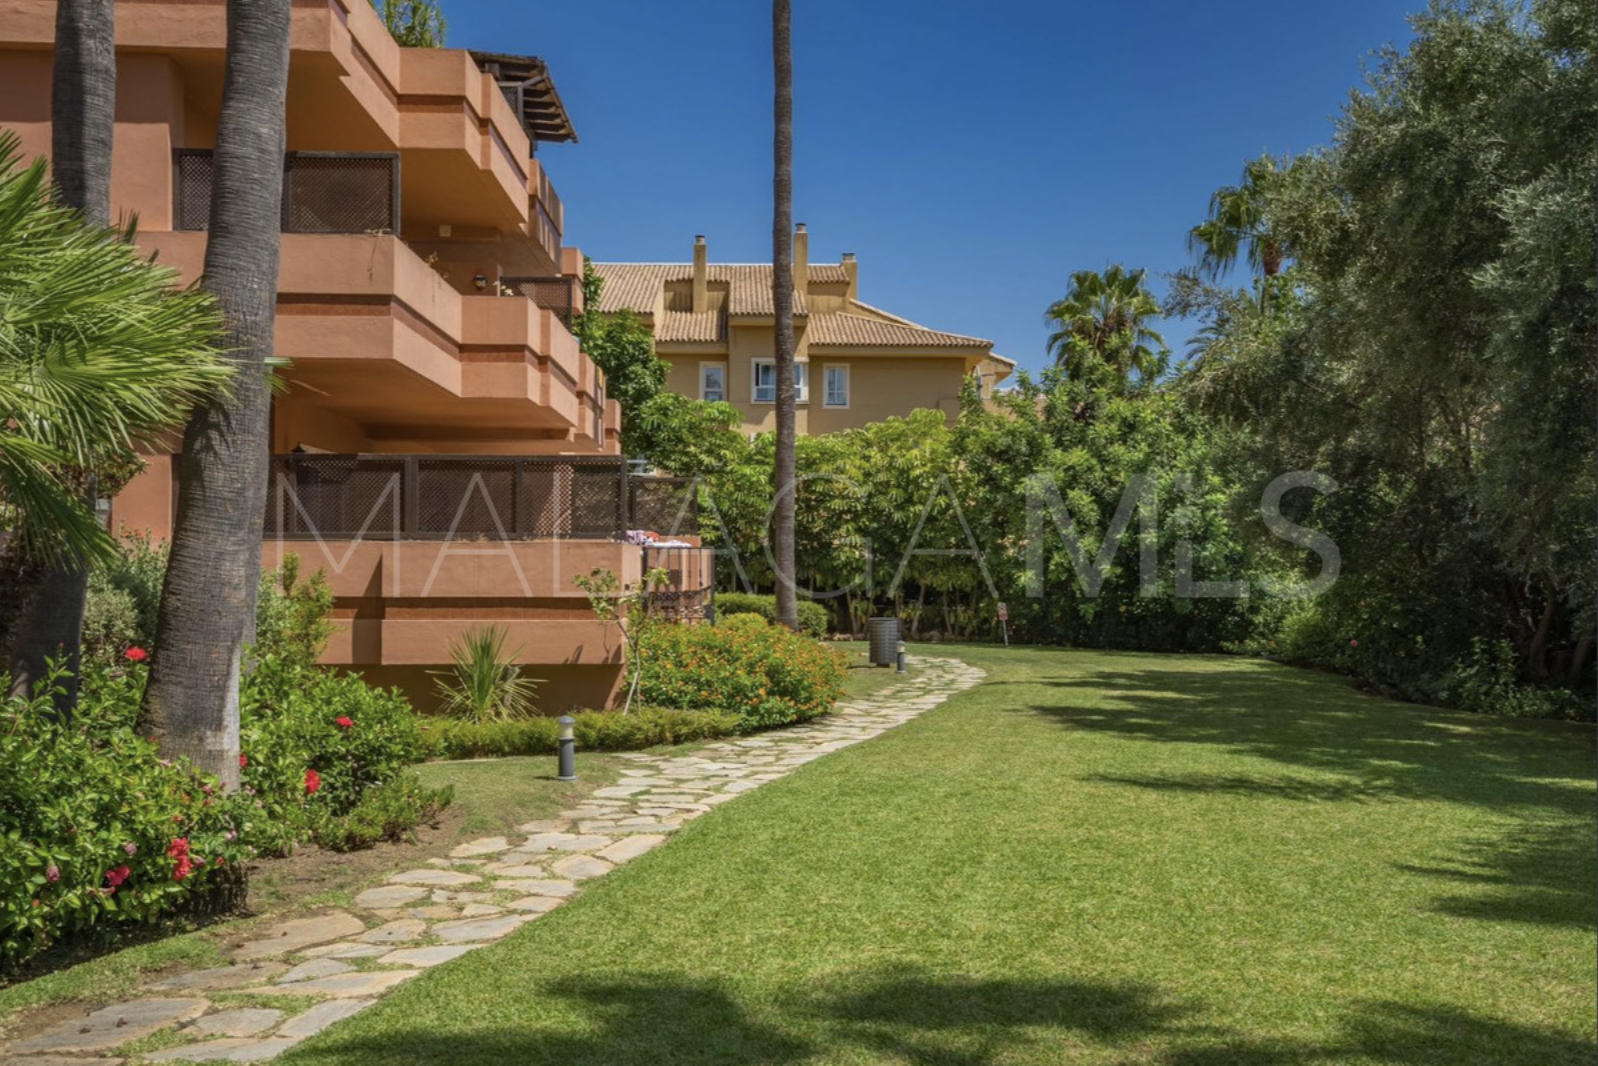 For sale apartment with 3 bedrooms in El Embrujo Marbella